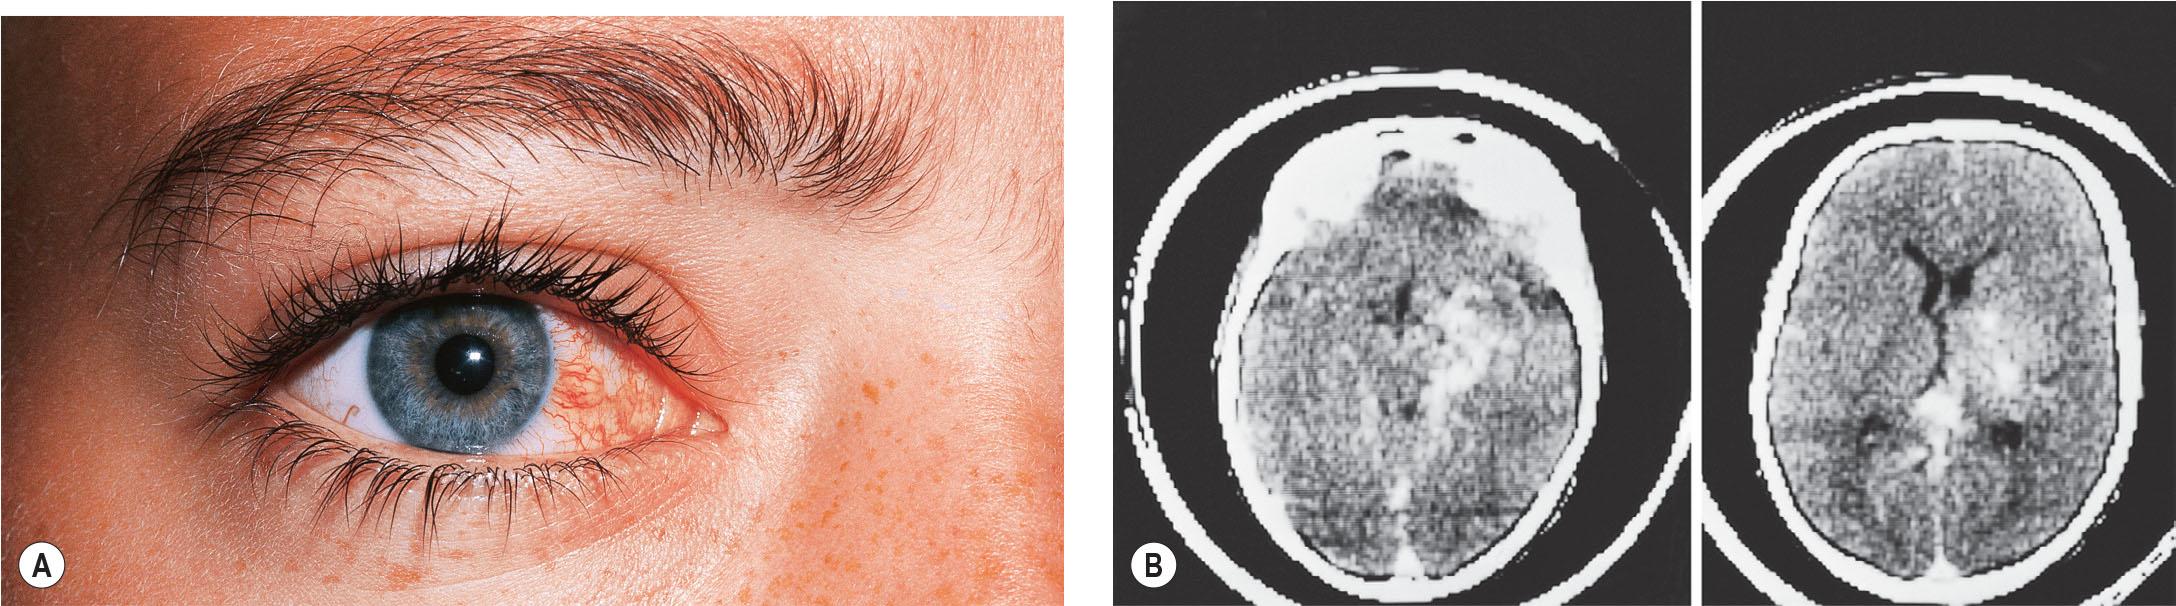 Fig. 20.7), ( A) Subconjunctival varicosities in a patient with an orbital and intracranial hemangioma. (B) Contrast-enhanced CT scans showing the intracranial lesion (same patient).